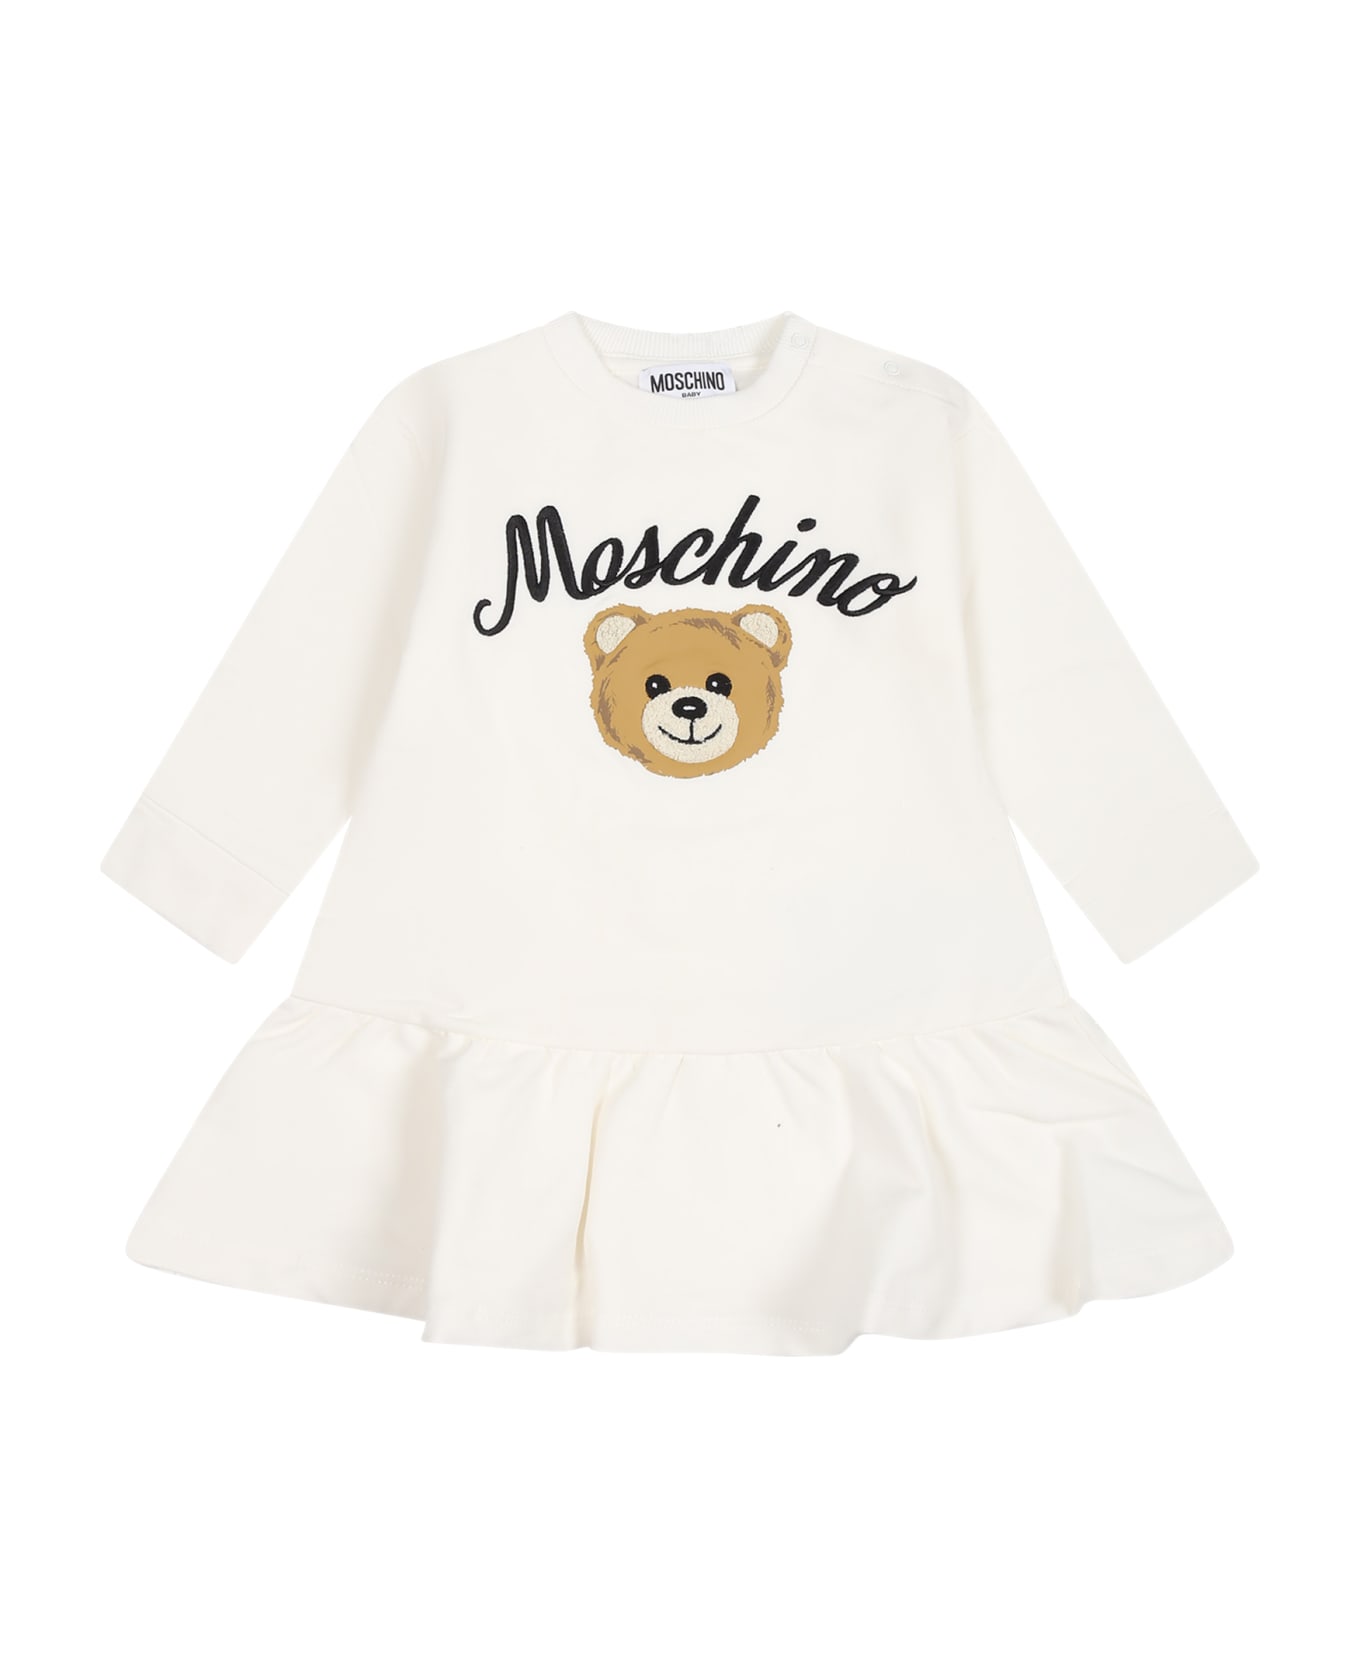 Moschino White Dress For Baby Girl With Teddy Baer And Logo - White